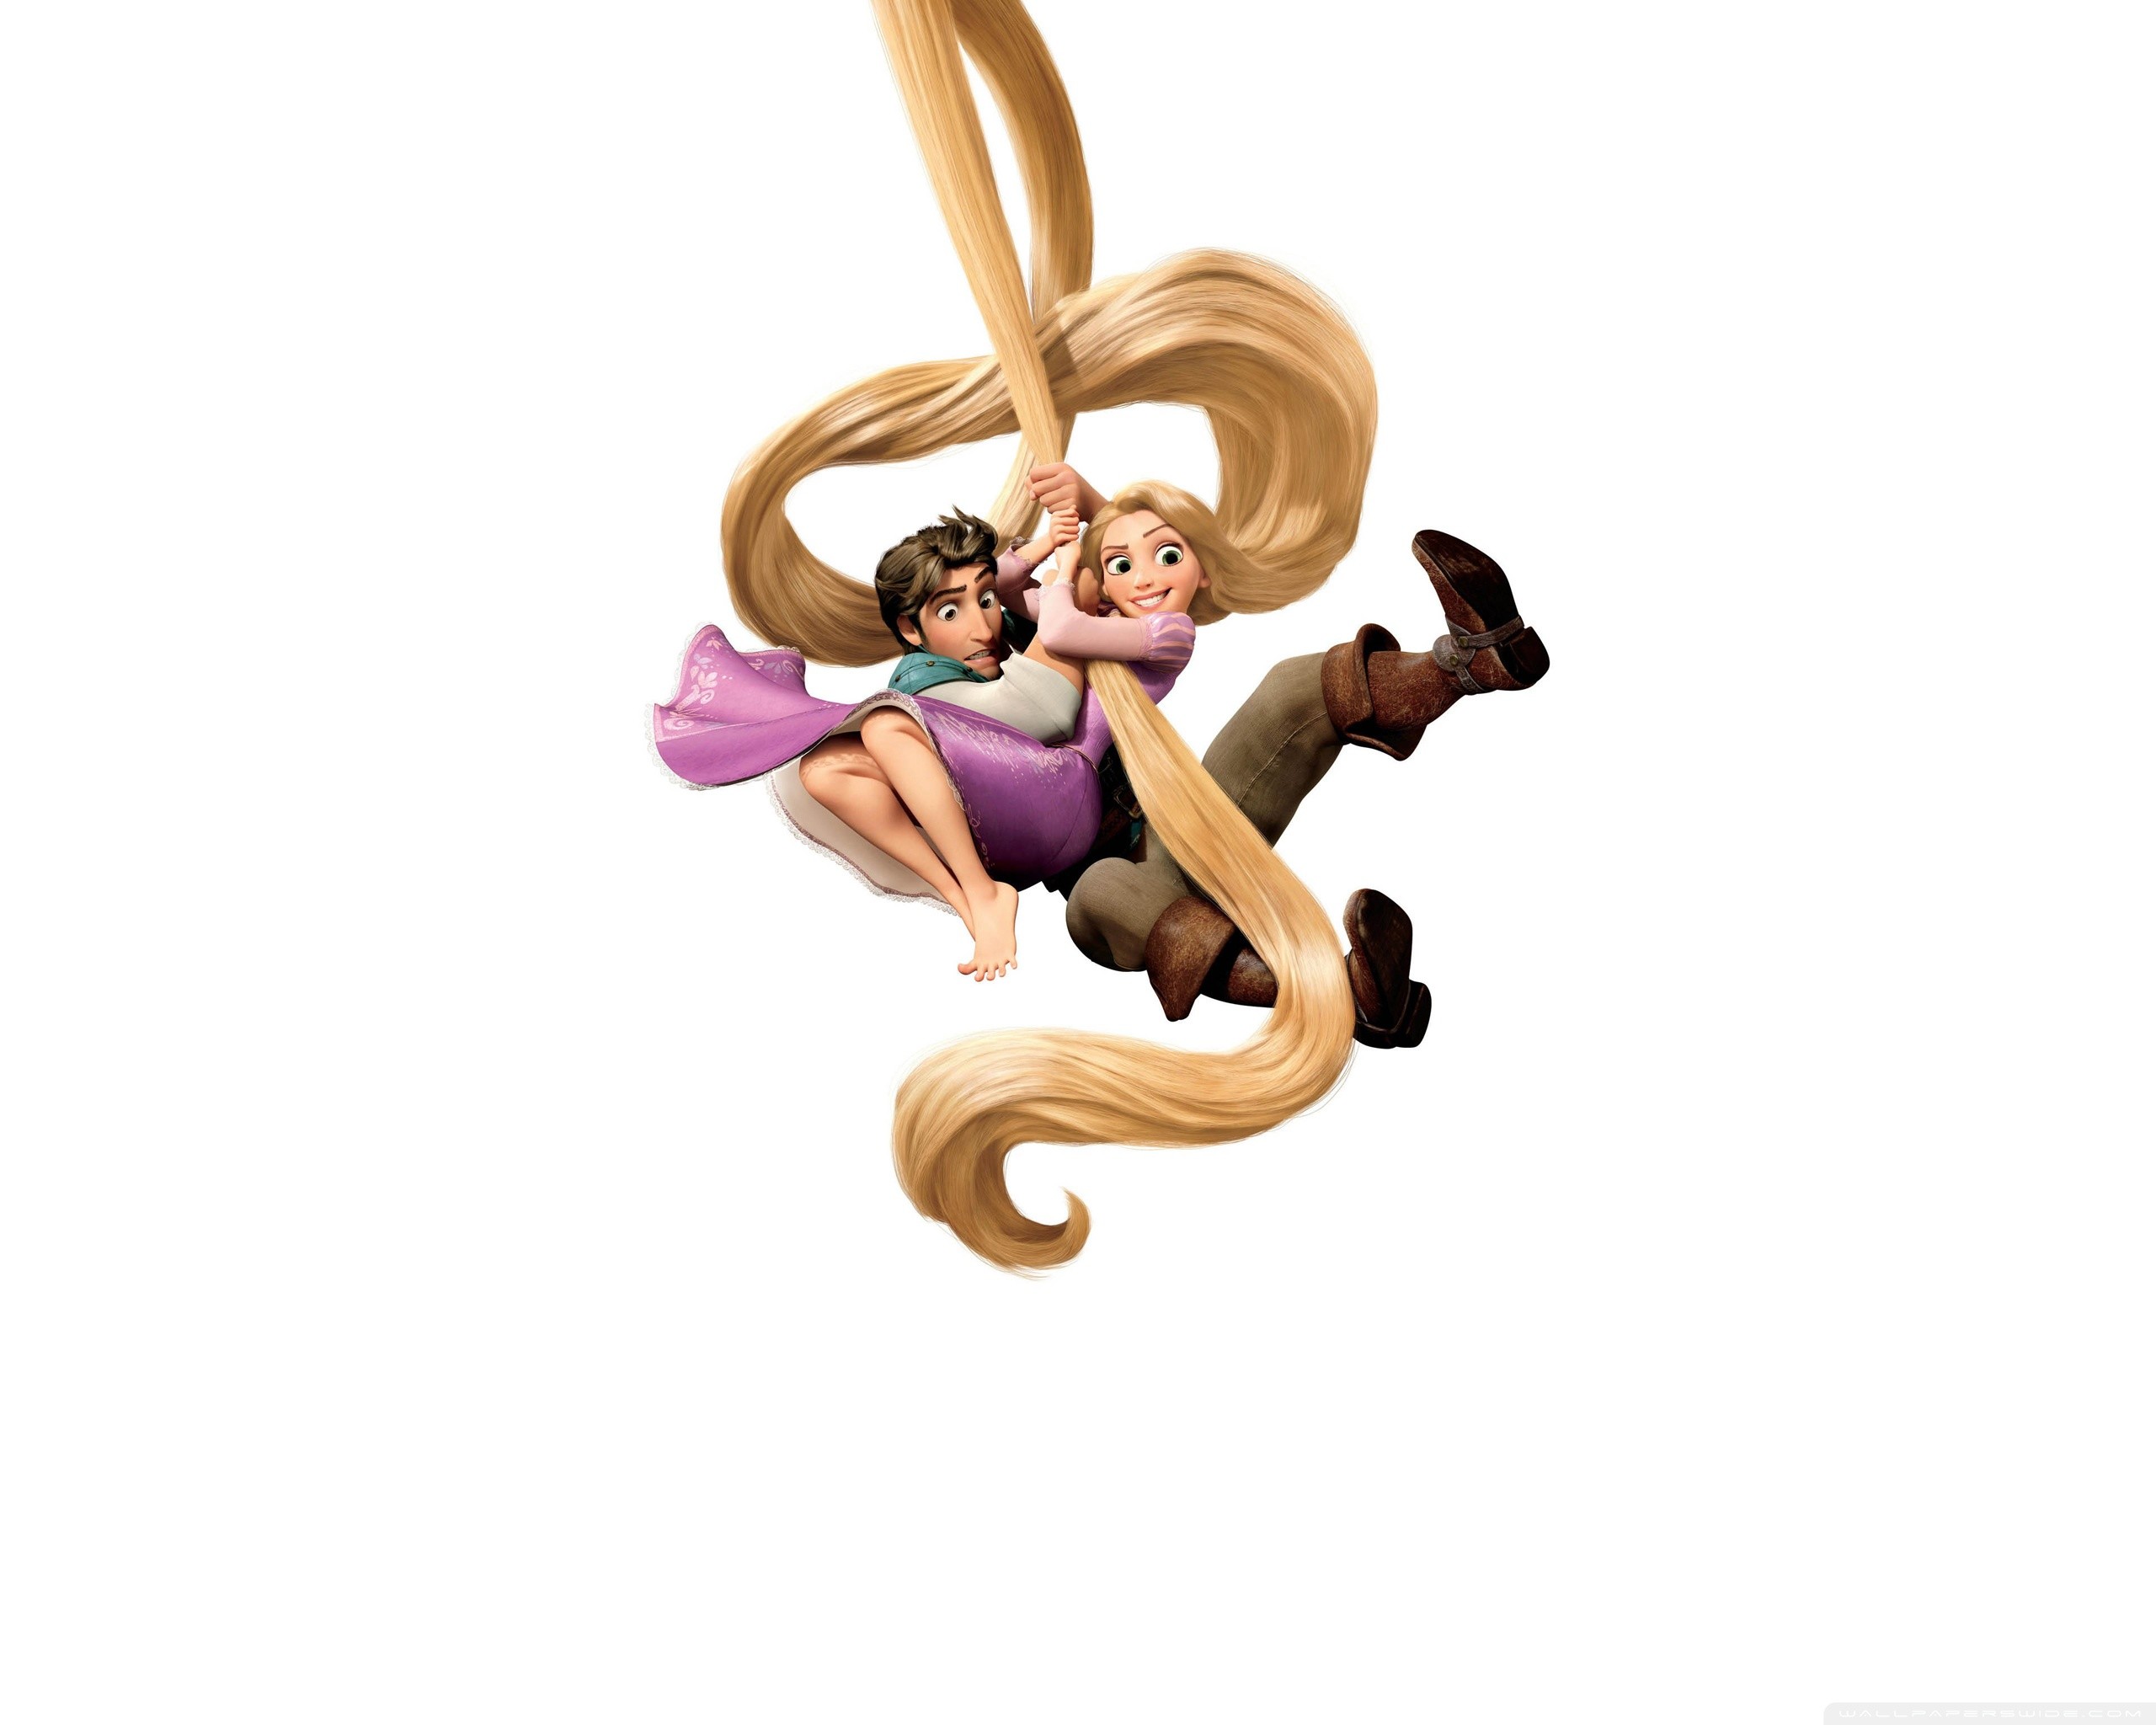 Tangled Rapunzel And Flynn Ryder HD Wide Wallpaper for Widescreen